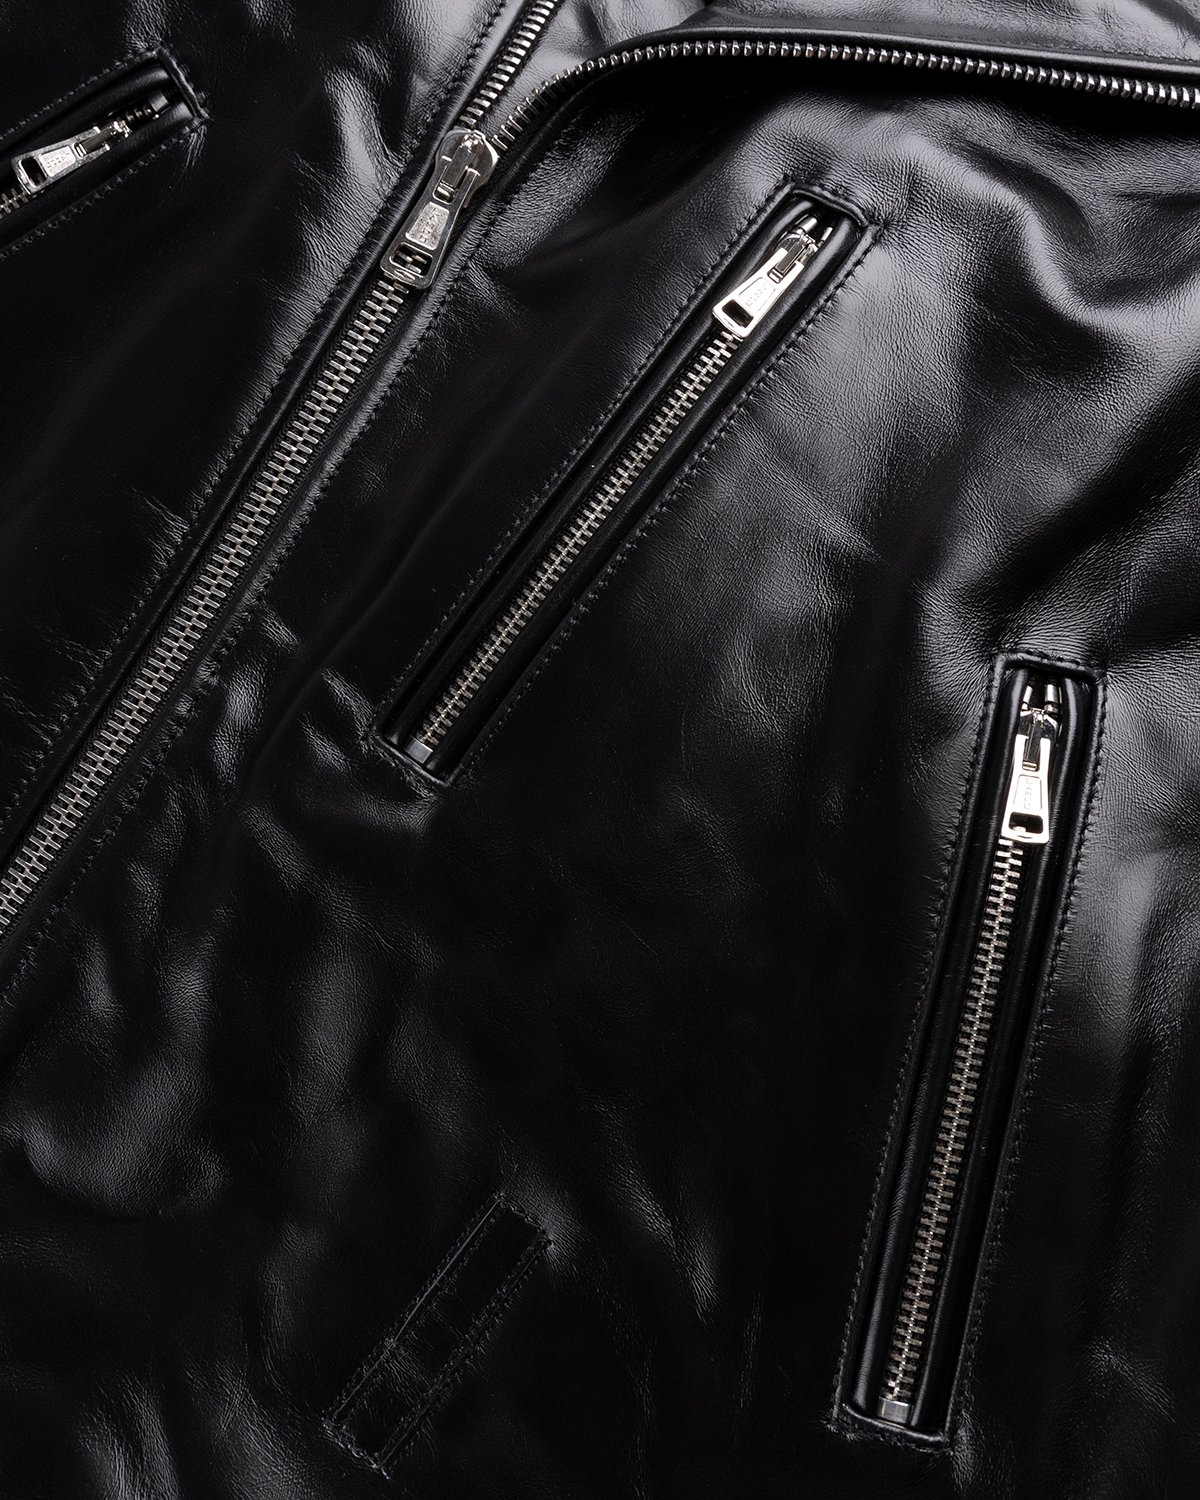 Our Legacy - Hellraiser Leather Jacket Aamon Black - Clothing - Black - Image 4